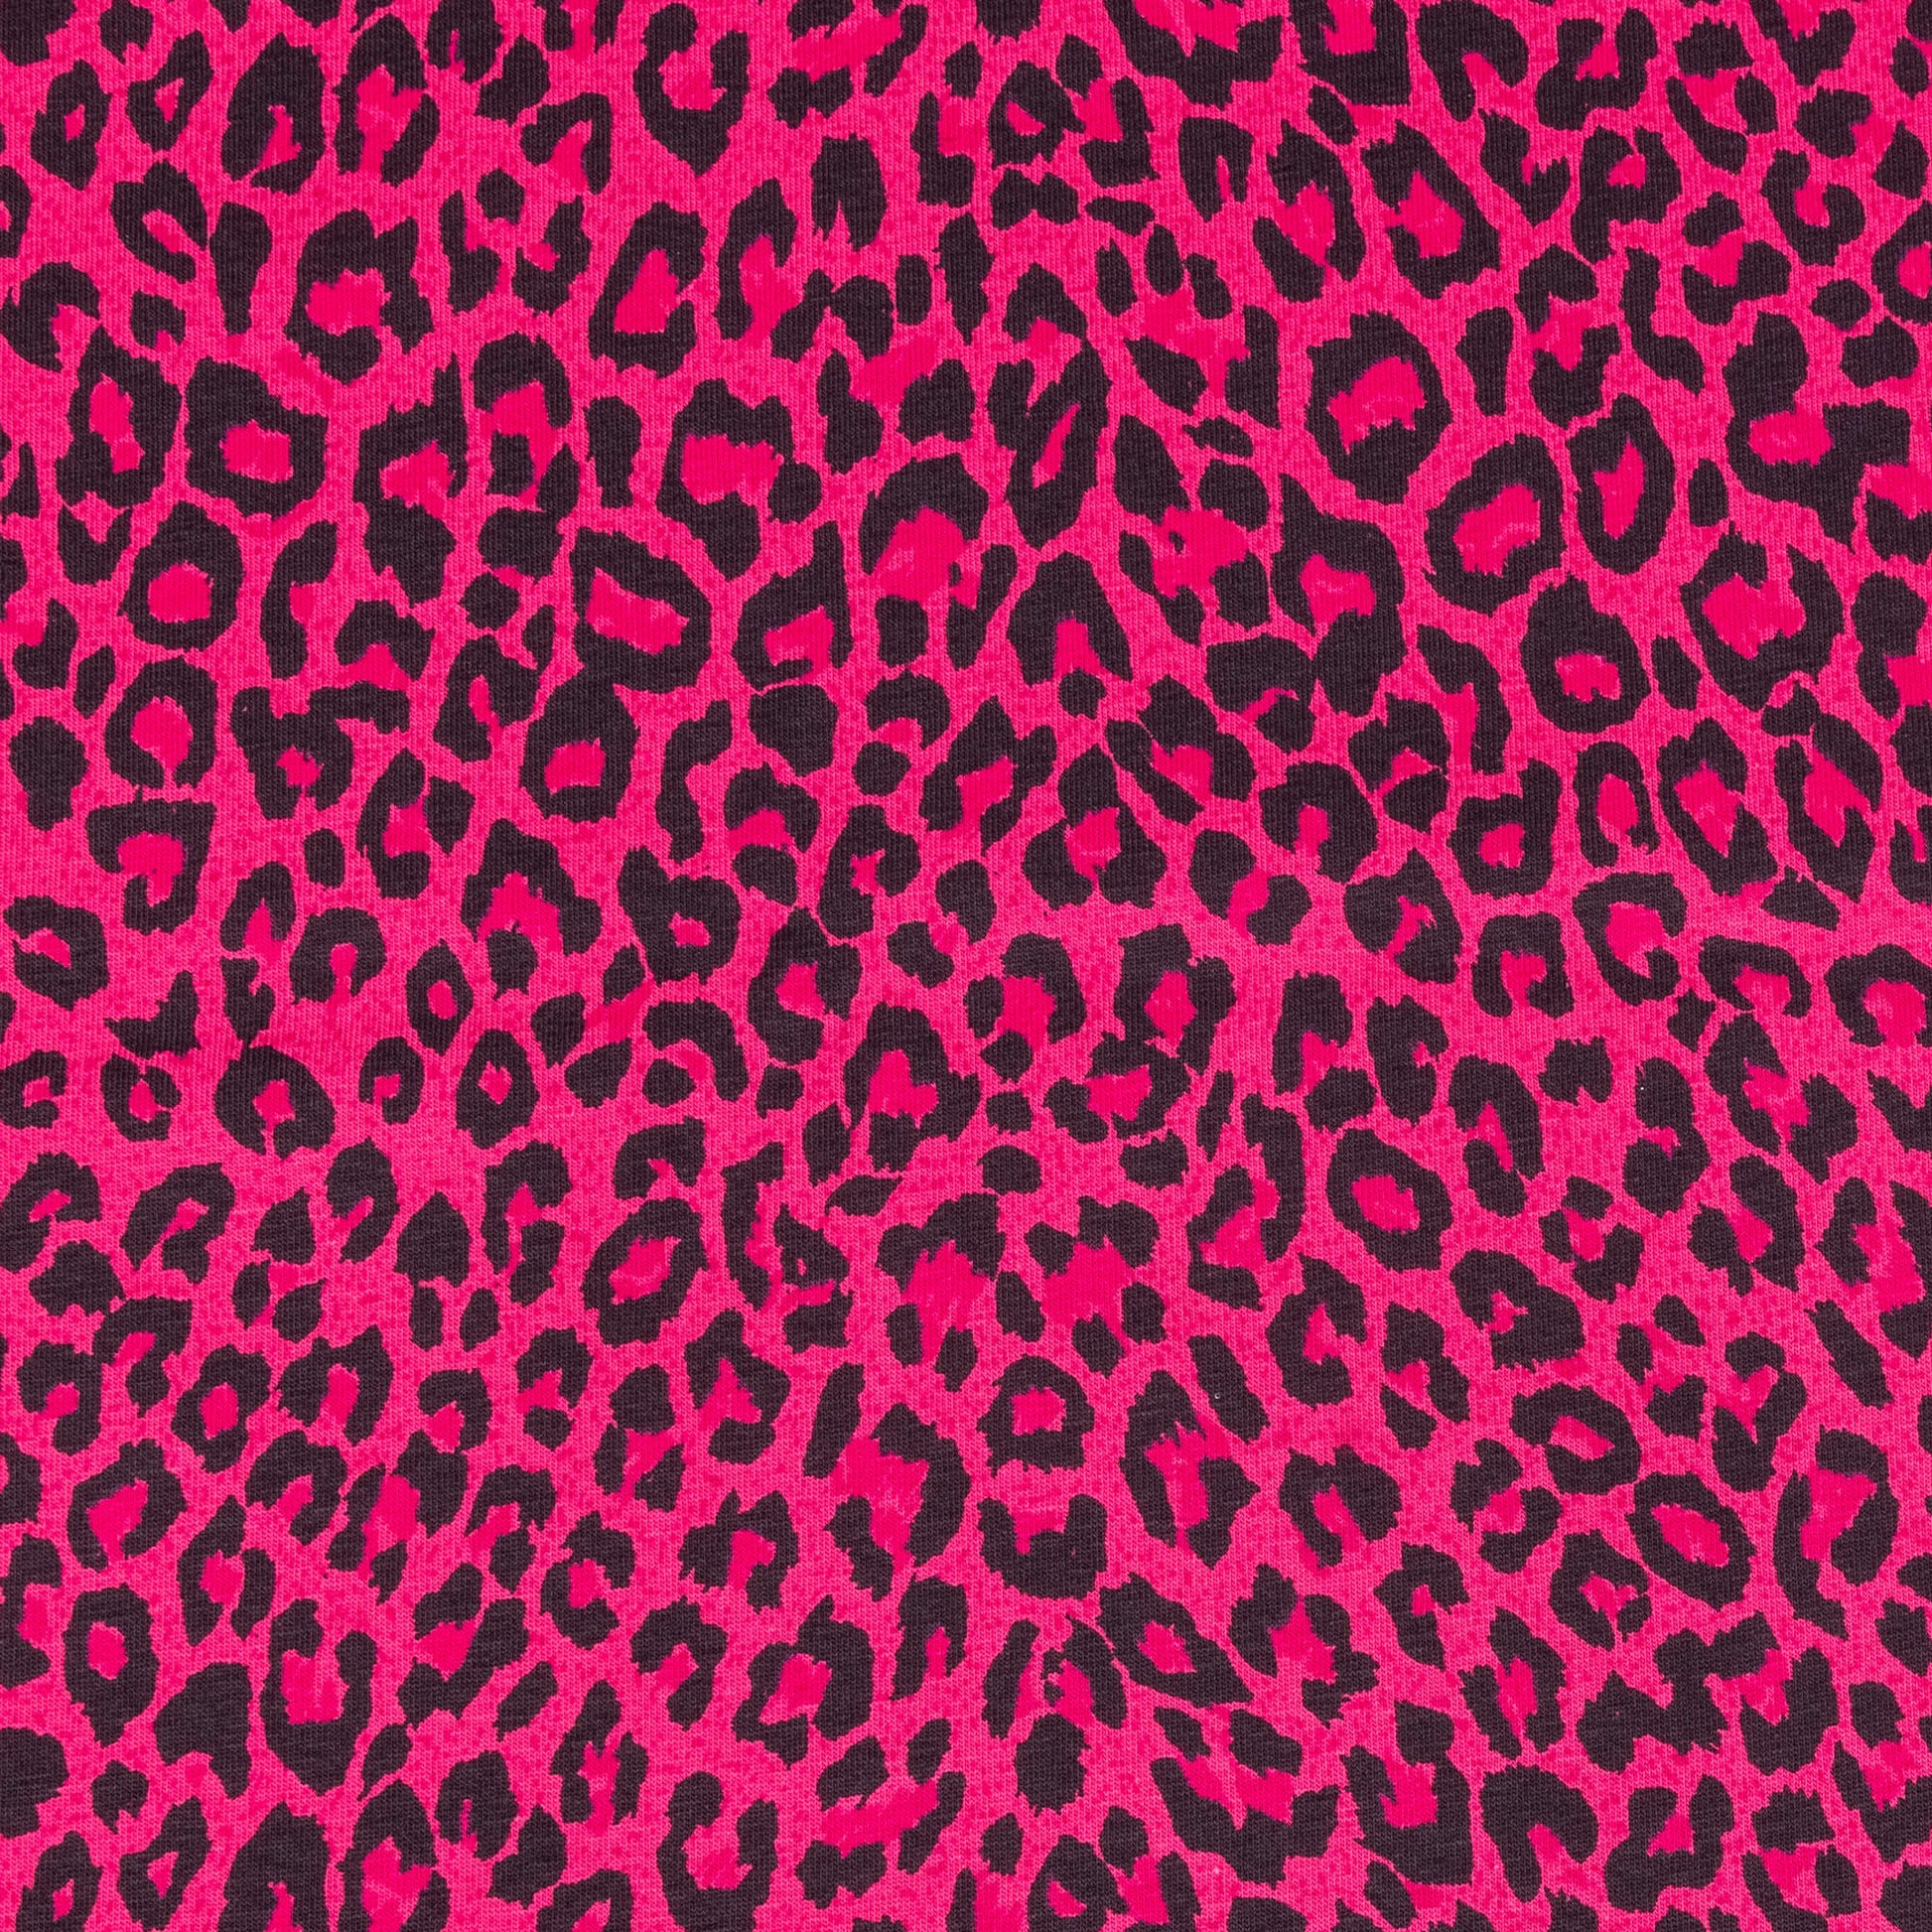 A close up of bright pink and black leopard print fabric in a soft jersey t-shirt weight perfect for crafting